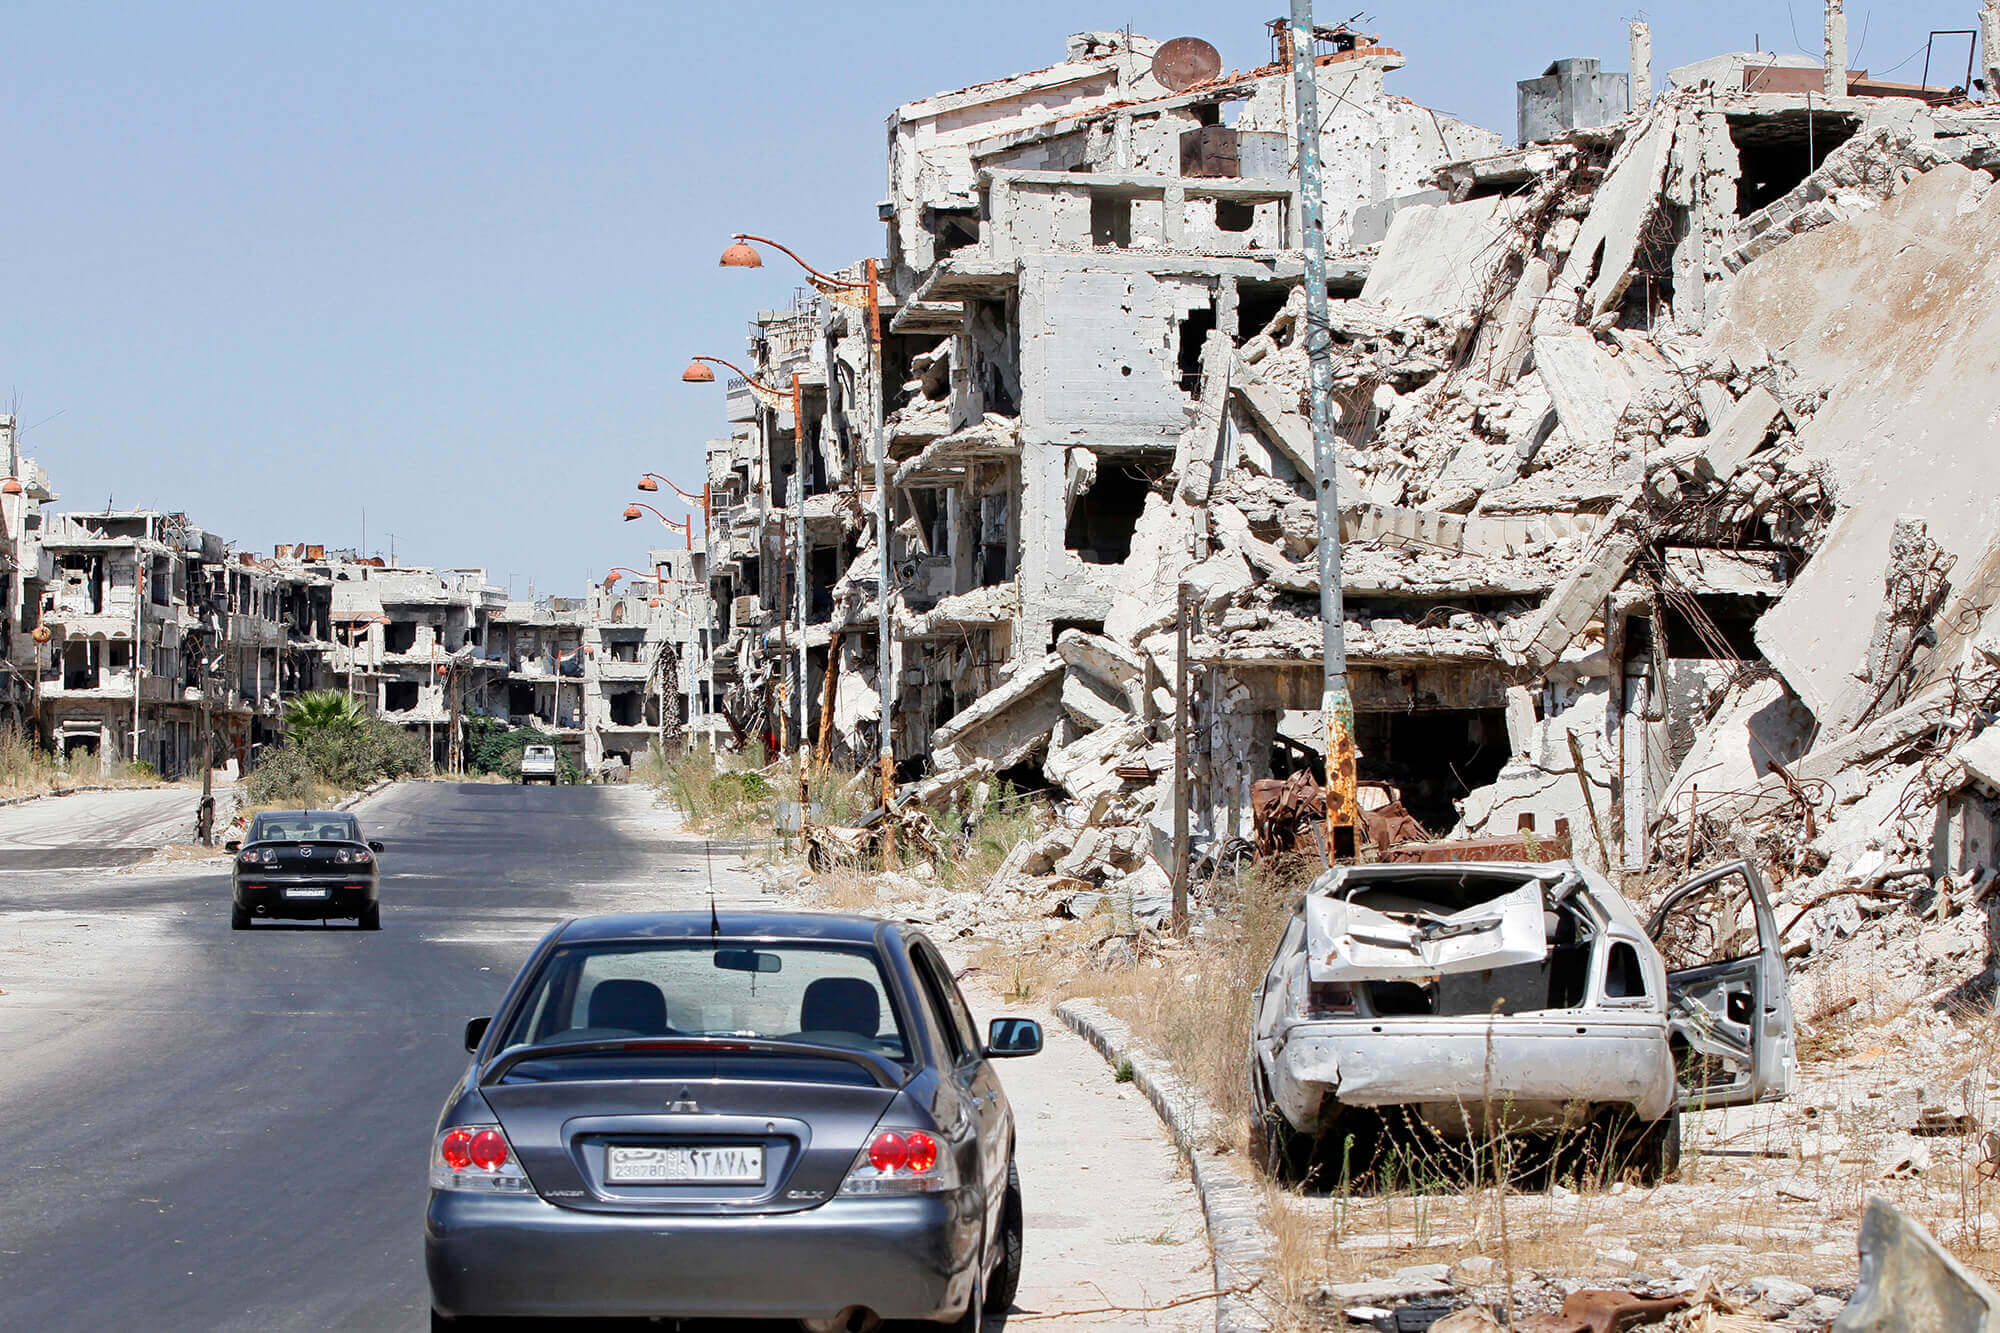 Image of Homs, Syria destroyed